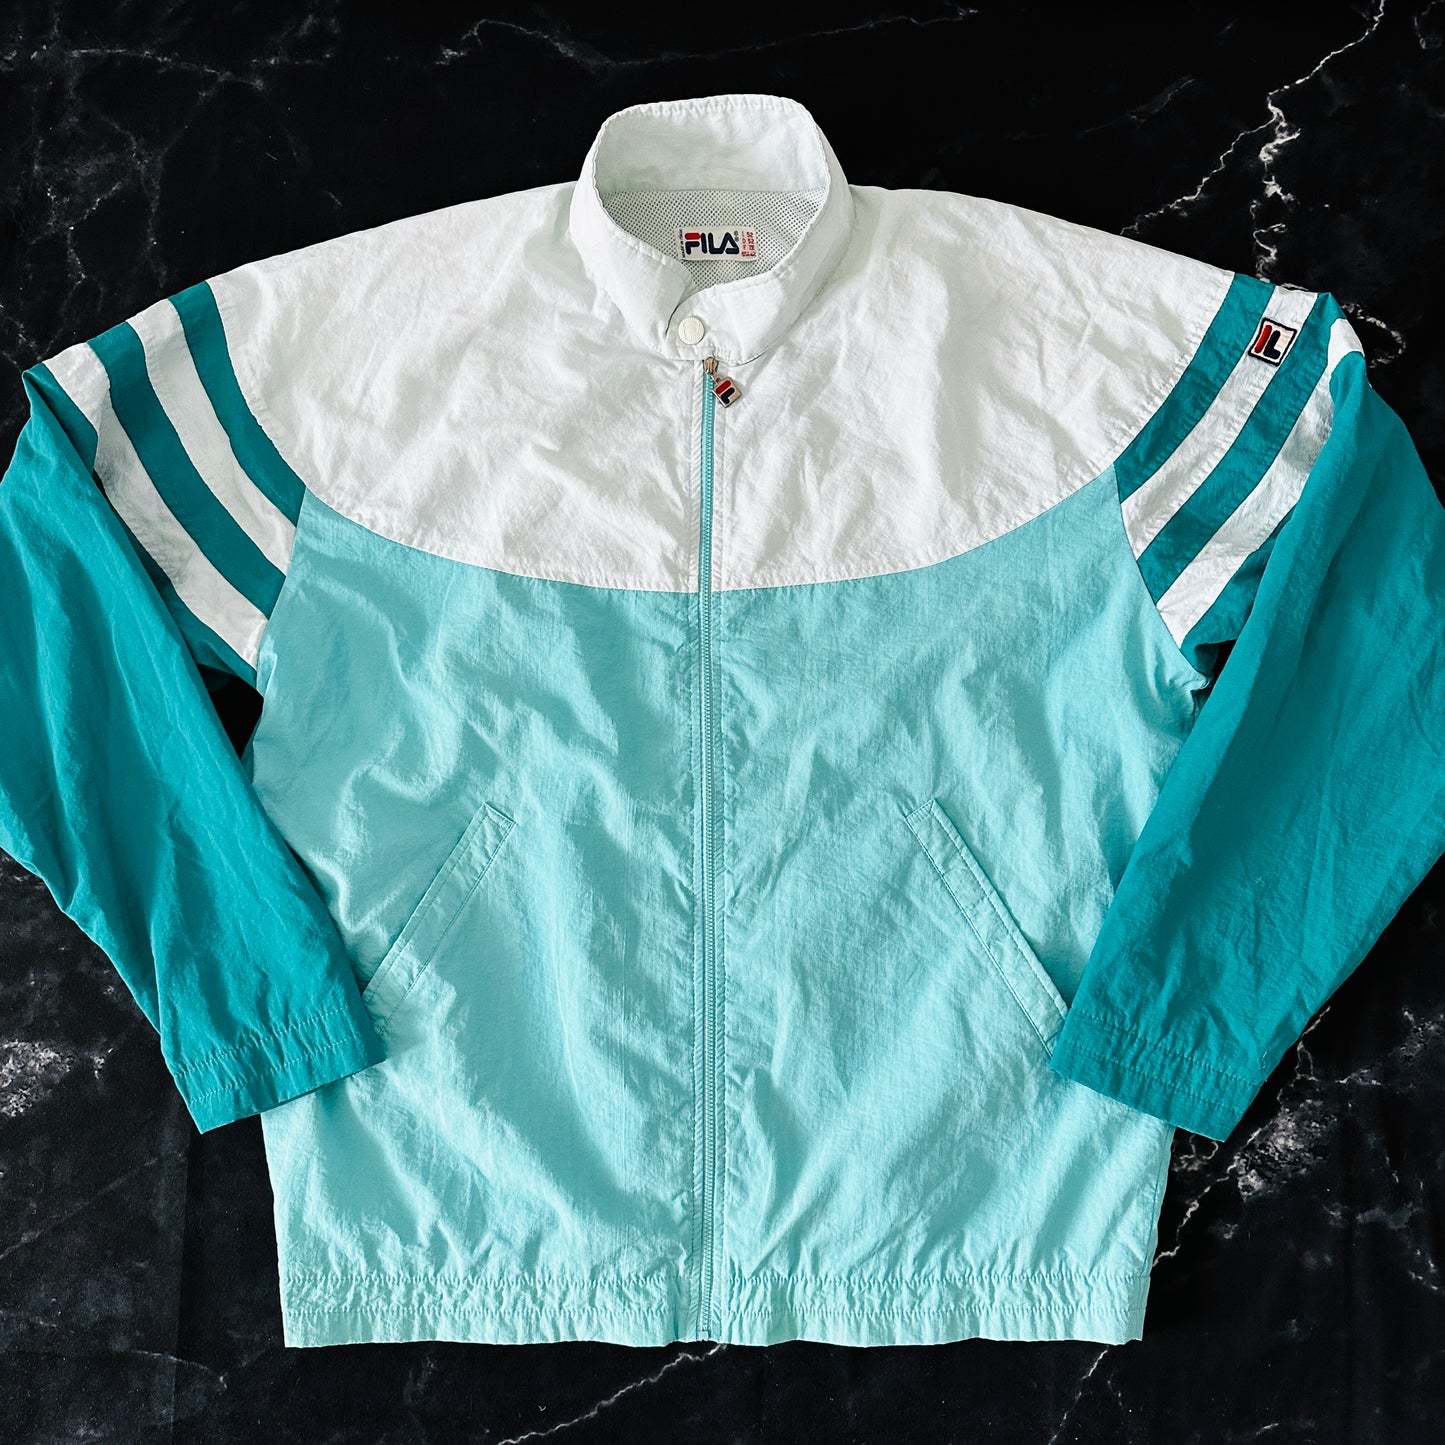 Fila Vintage 80s Track Top - 52 - Made in Italy